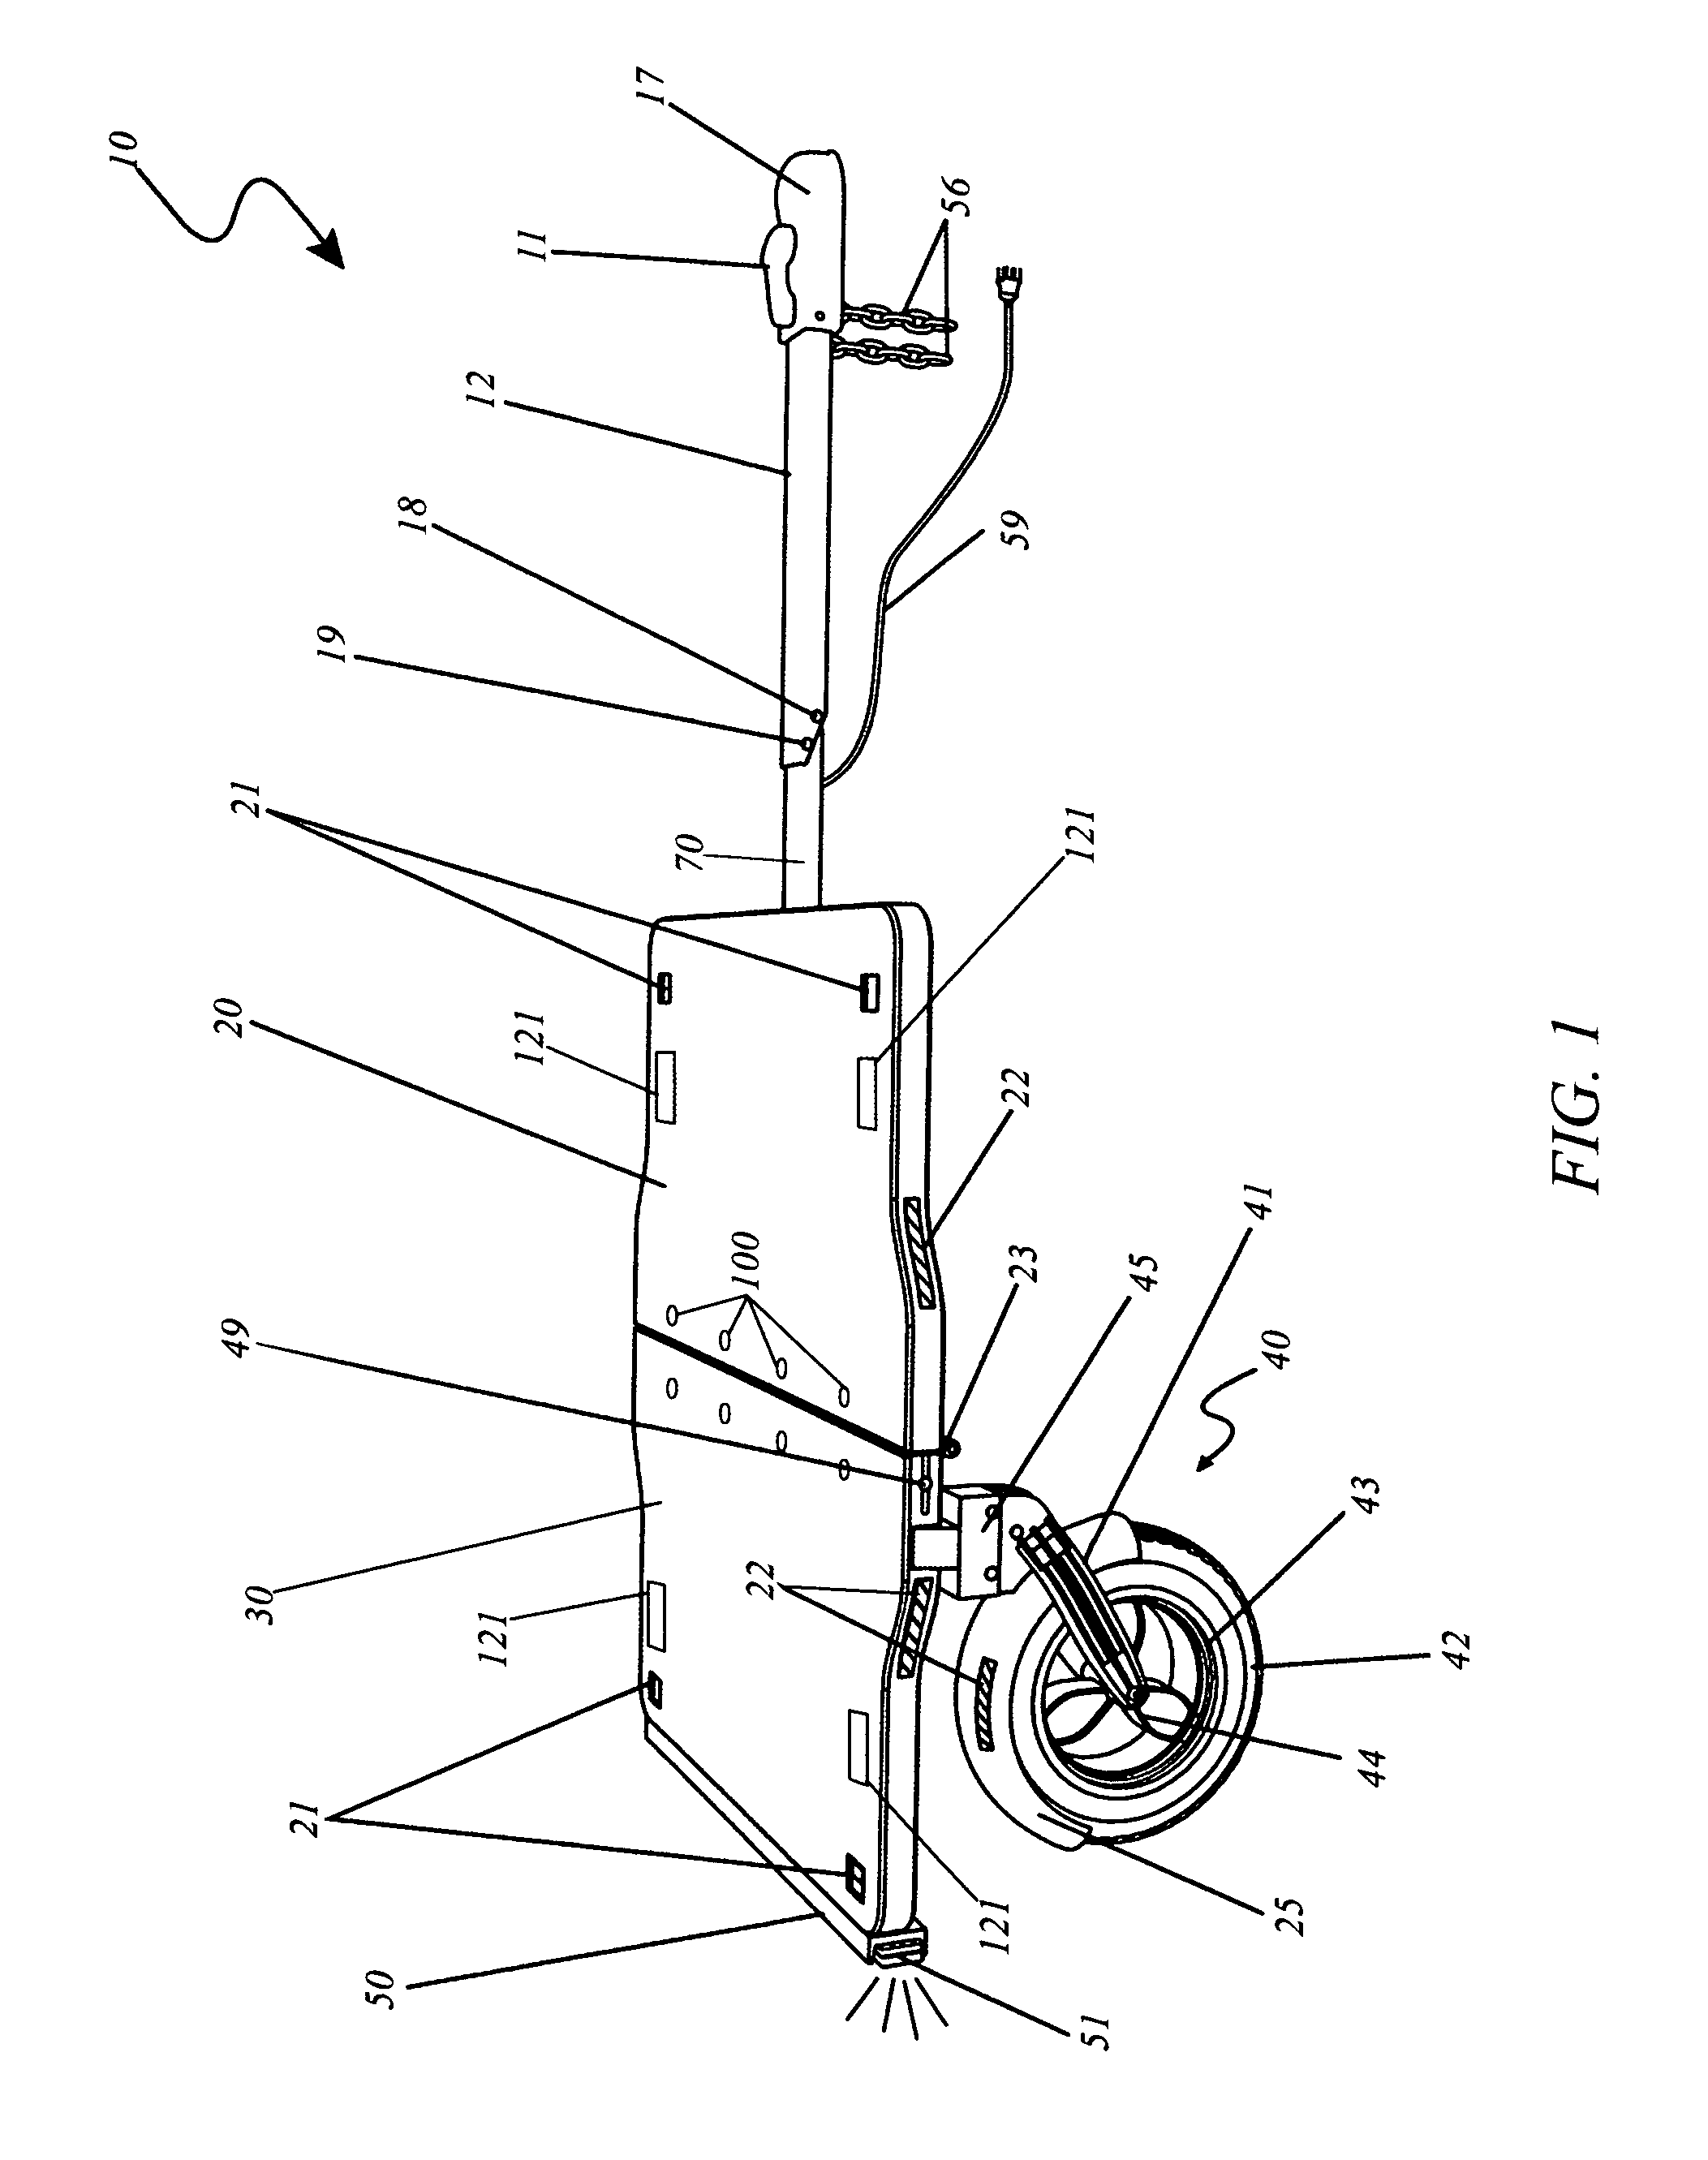 Portable and adjustable trailer assembly and method of use thereof